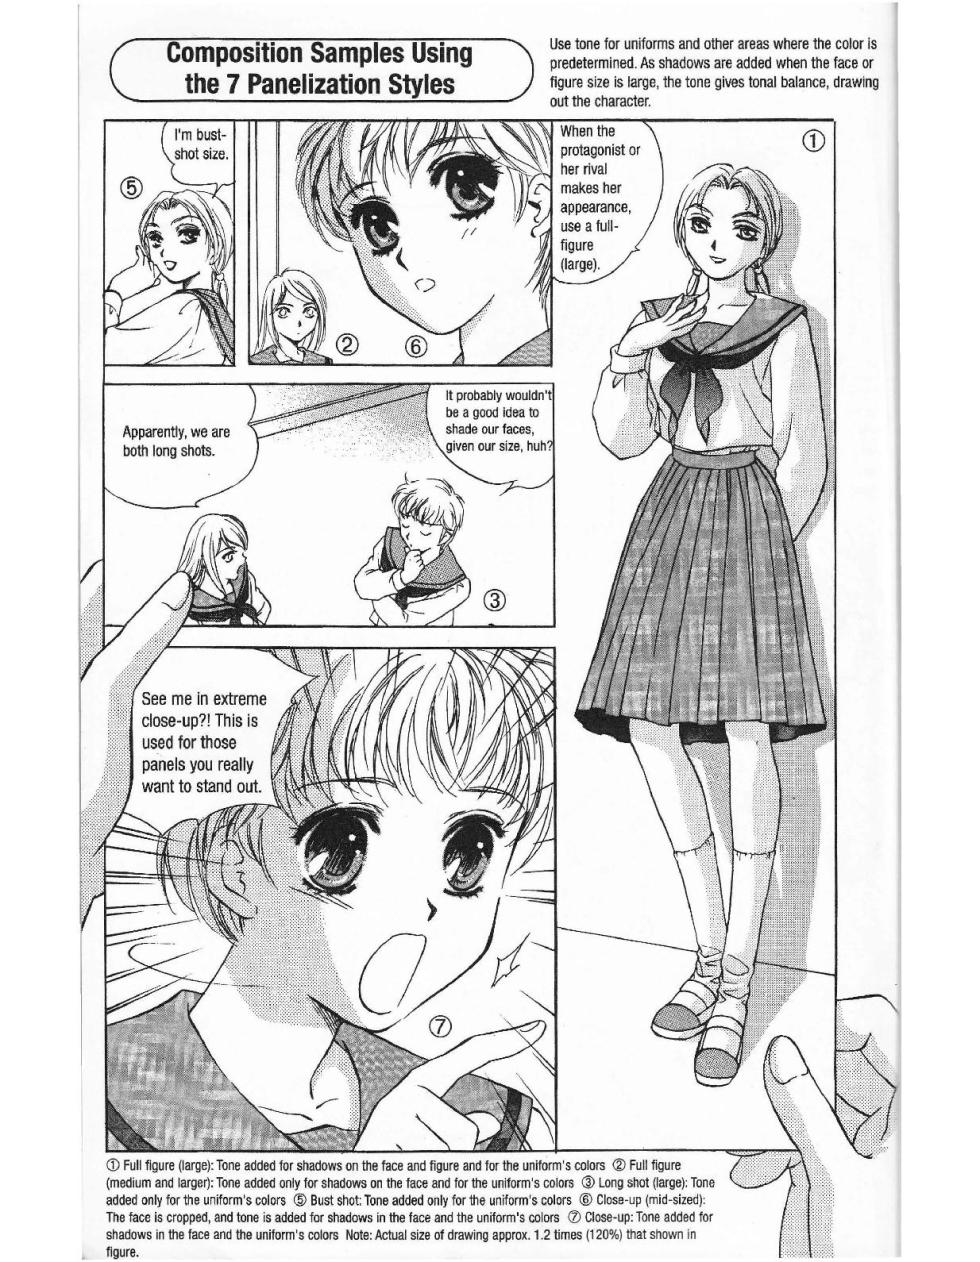 More How to Draw Manga Vol. 3 - Enhancing a Character's Sense of Presence - Page 14